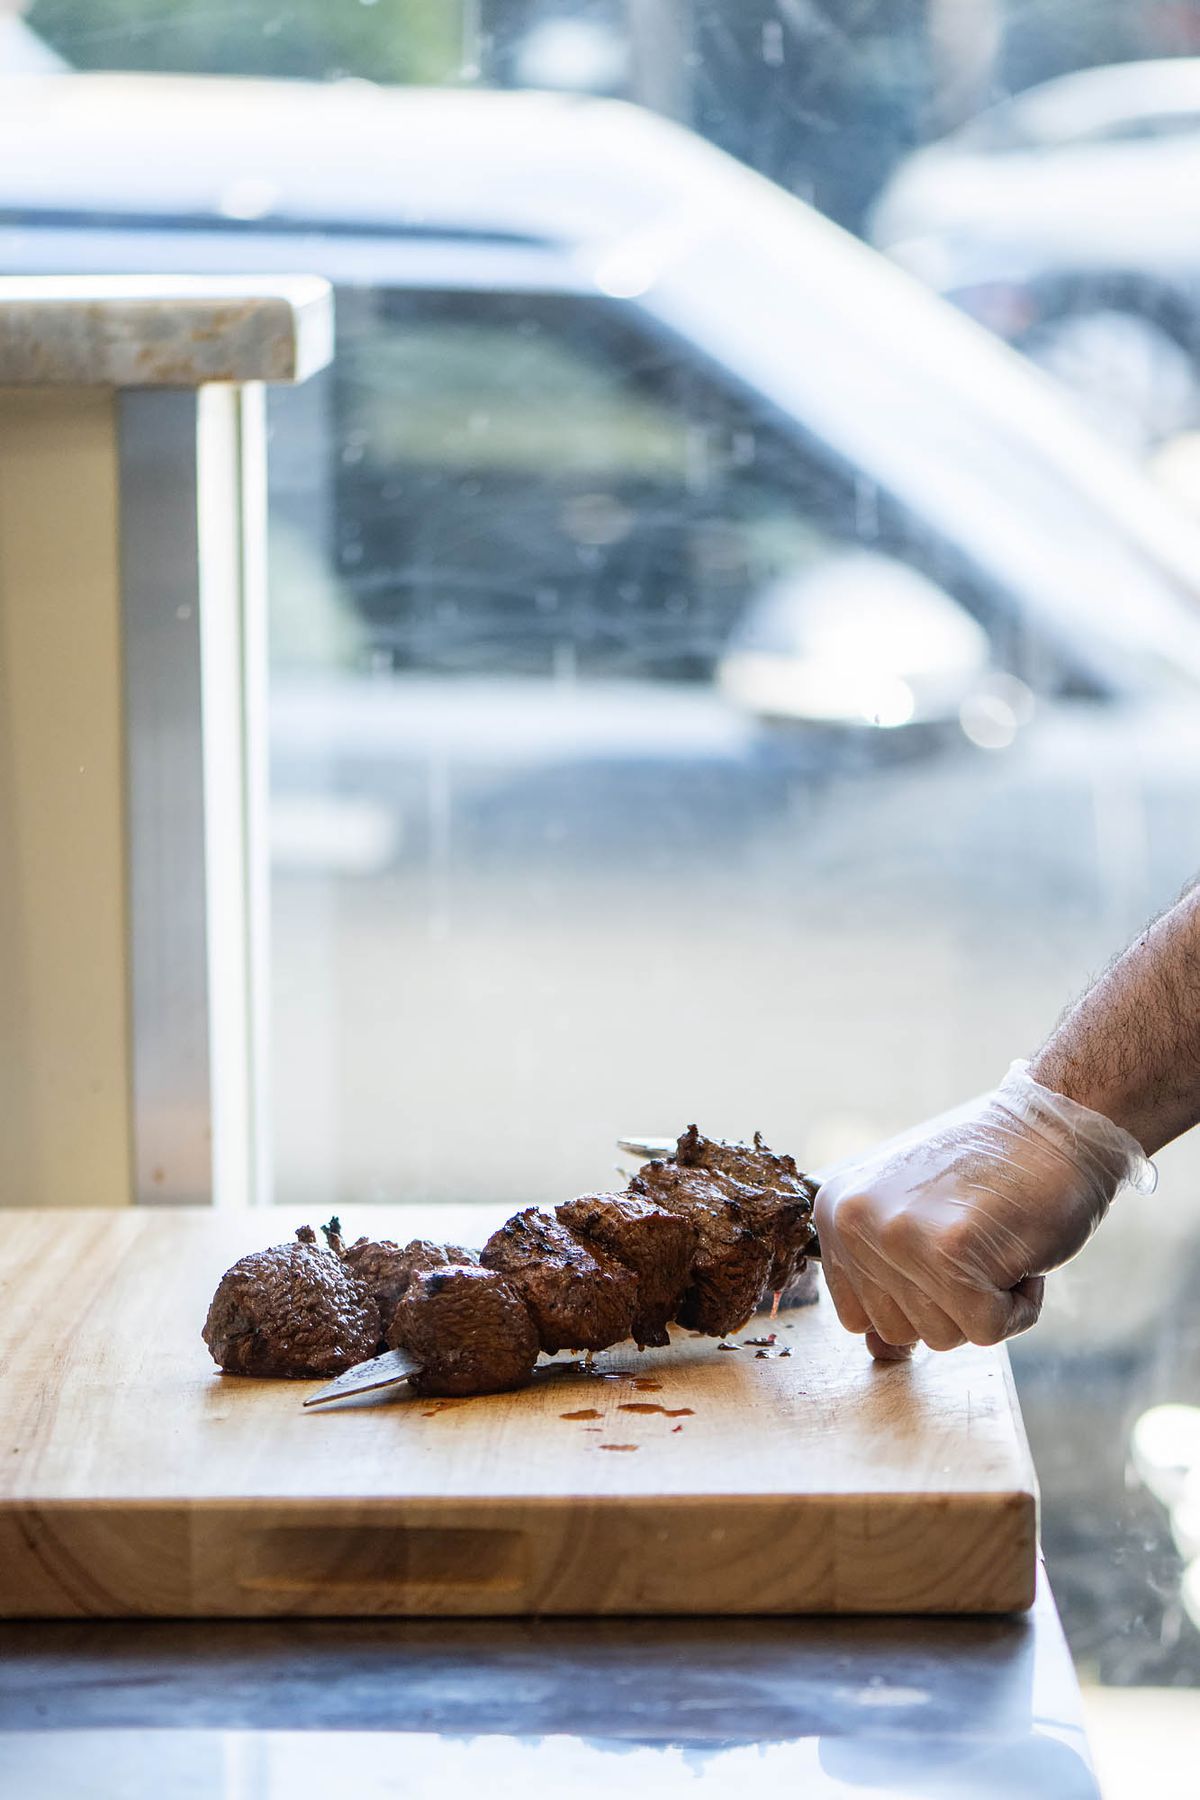 A man prepares grilled meat next to an open window at MidEast Tacos in Silver Lake, California.